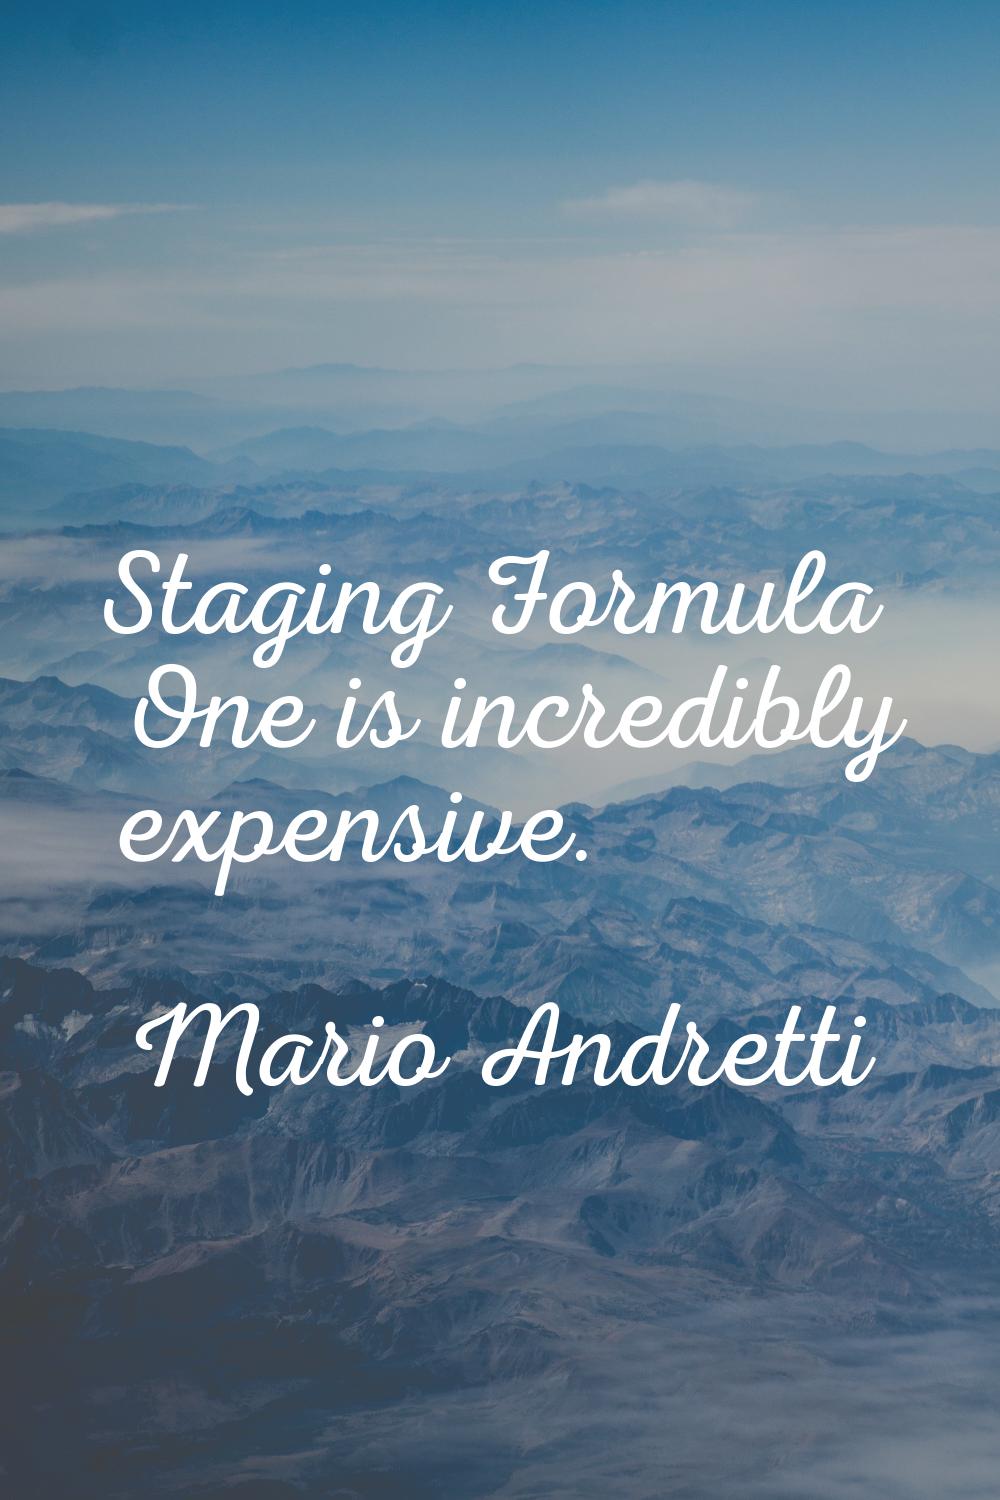 Staging Formula One is incredibly expensive.